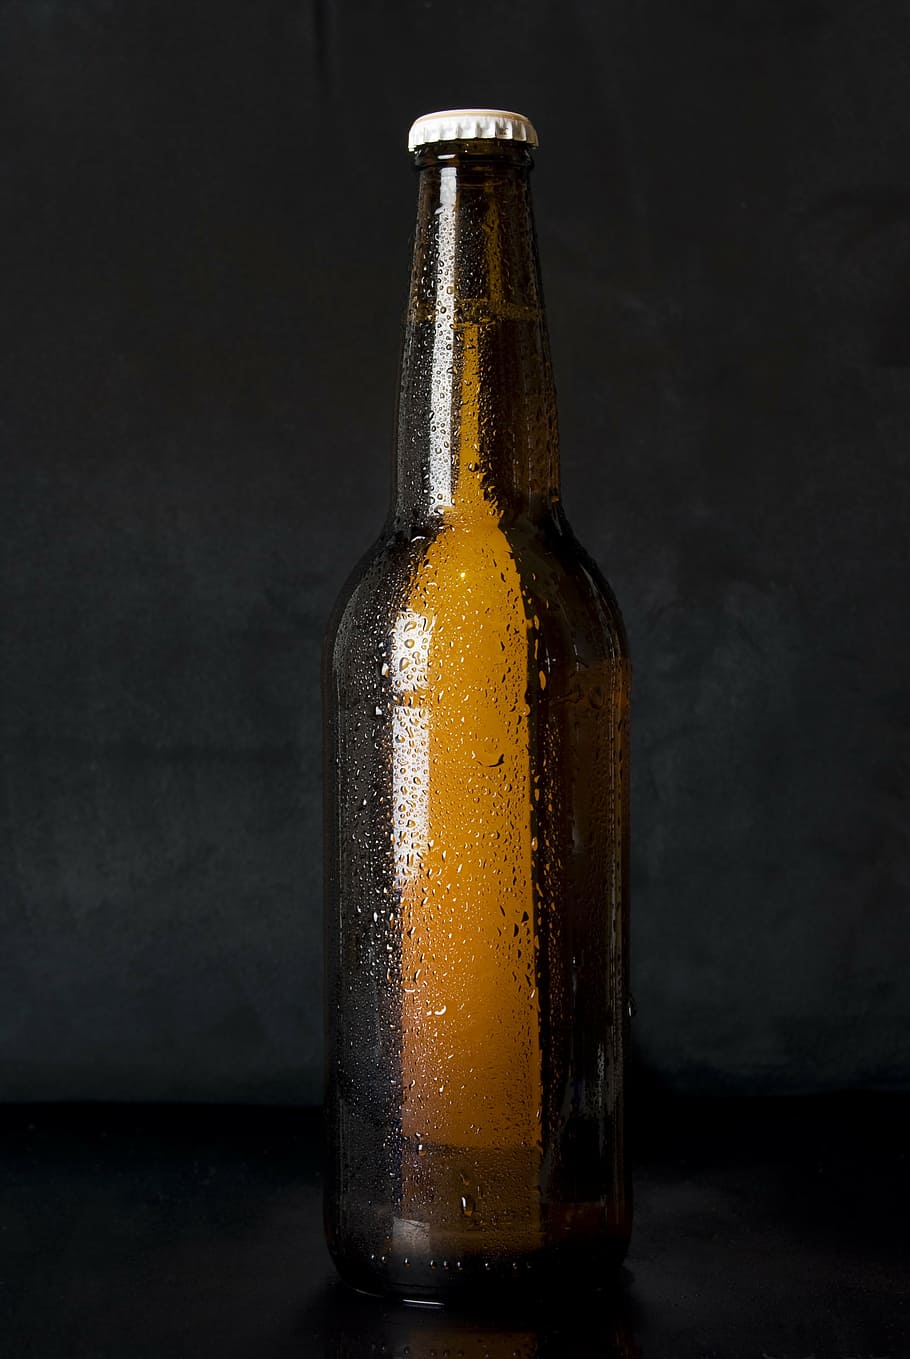 brown, glass bottle, top, black, surface, glass, bottle, beer, alcohol, brew